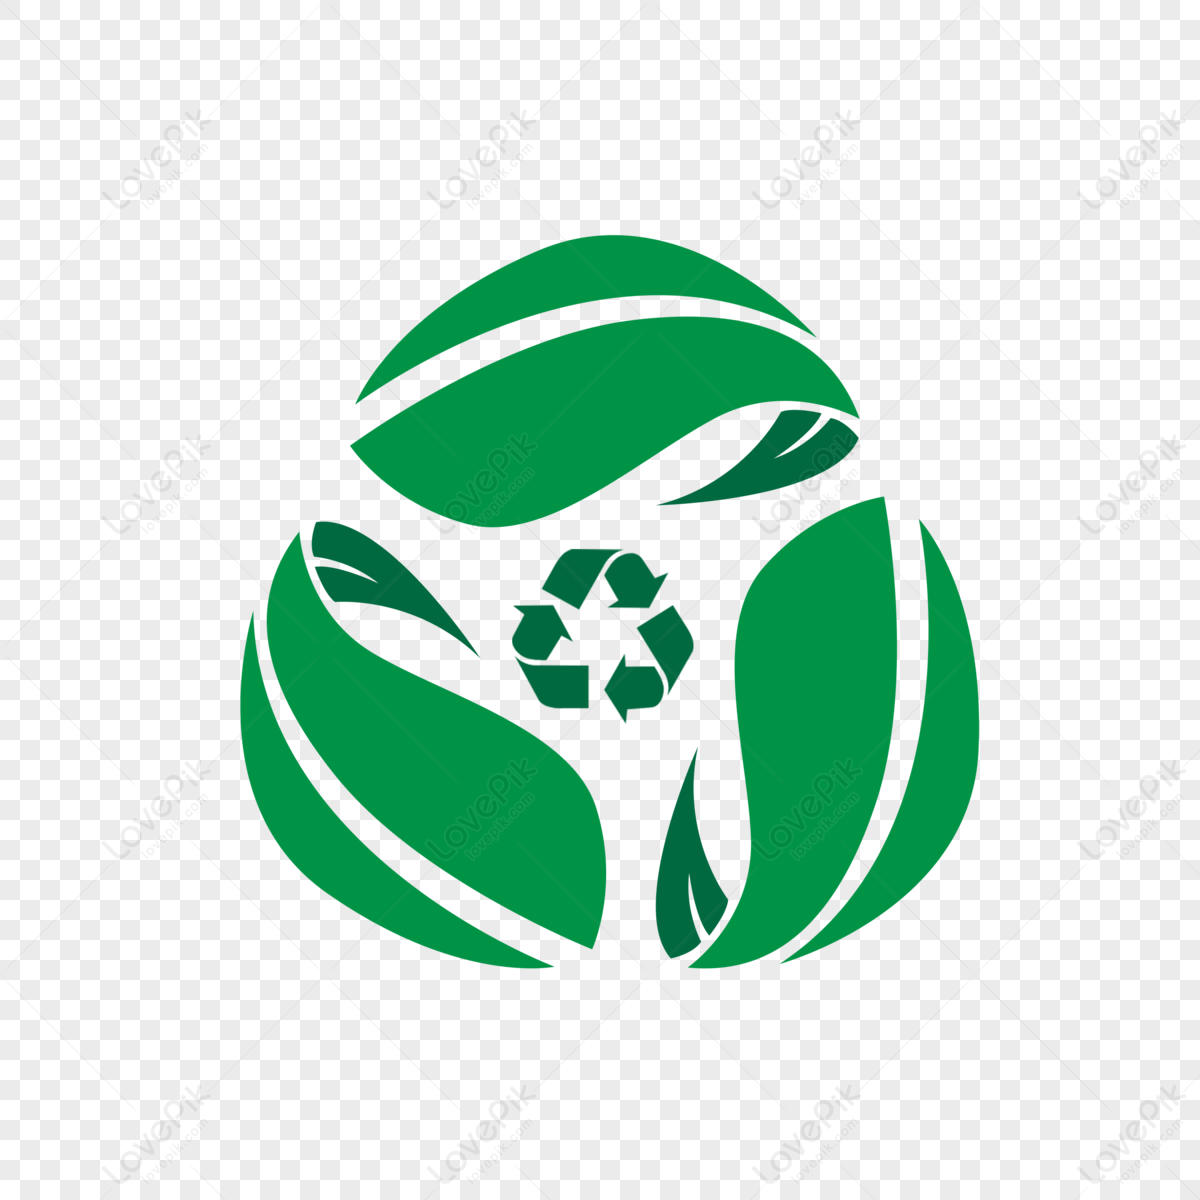 Biodegradable recyclable plastic free label vector icon. Eco safe bio  recyclable and degradable package stamp logo Stock Vector by ©avector  279090644